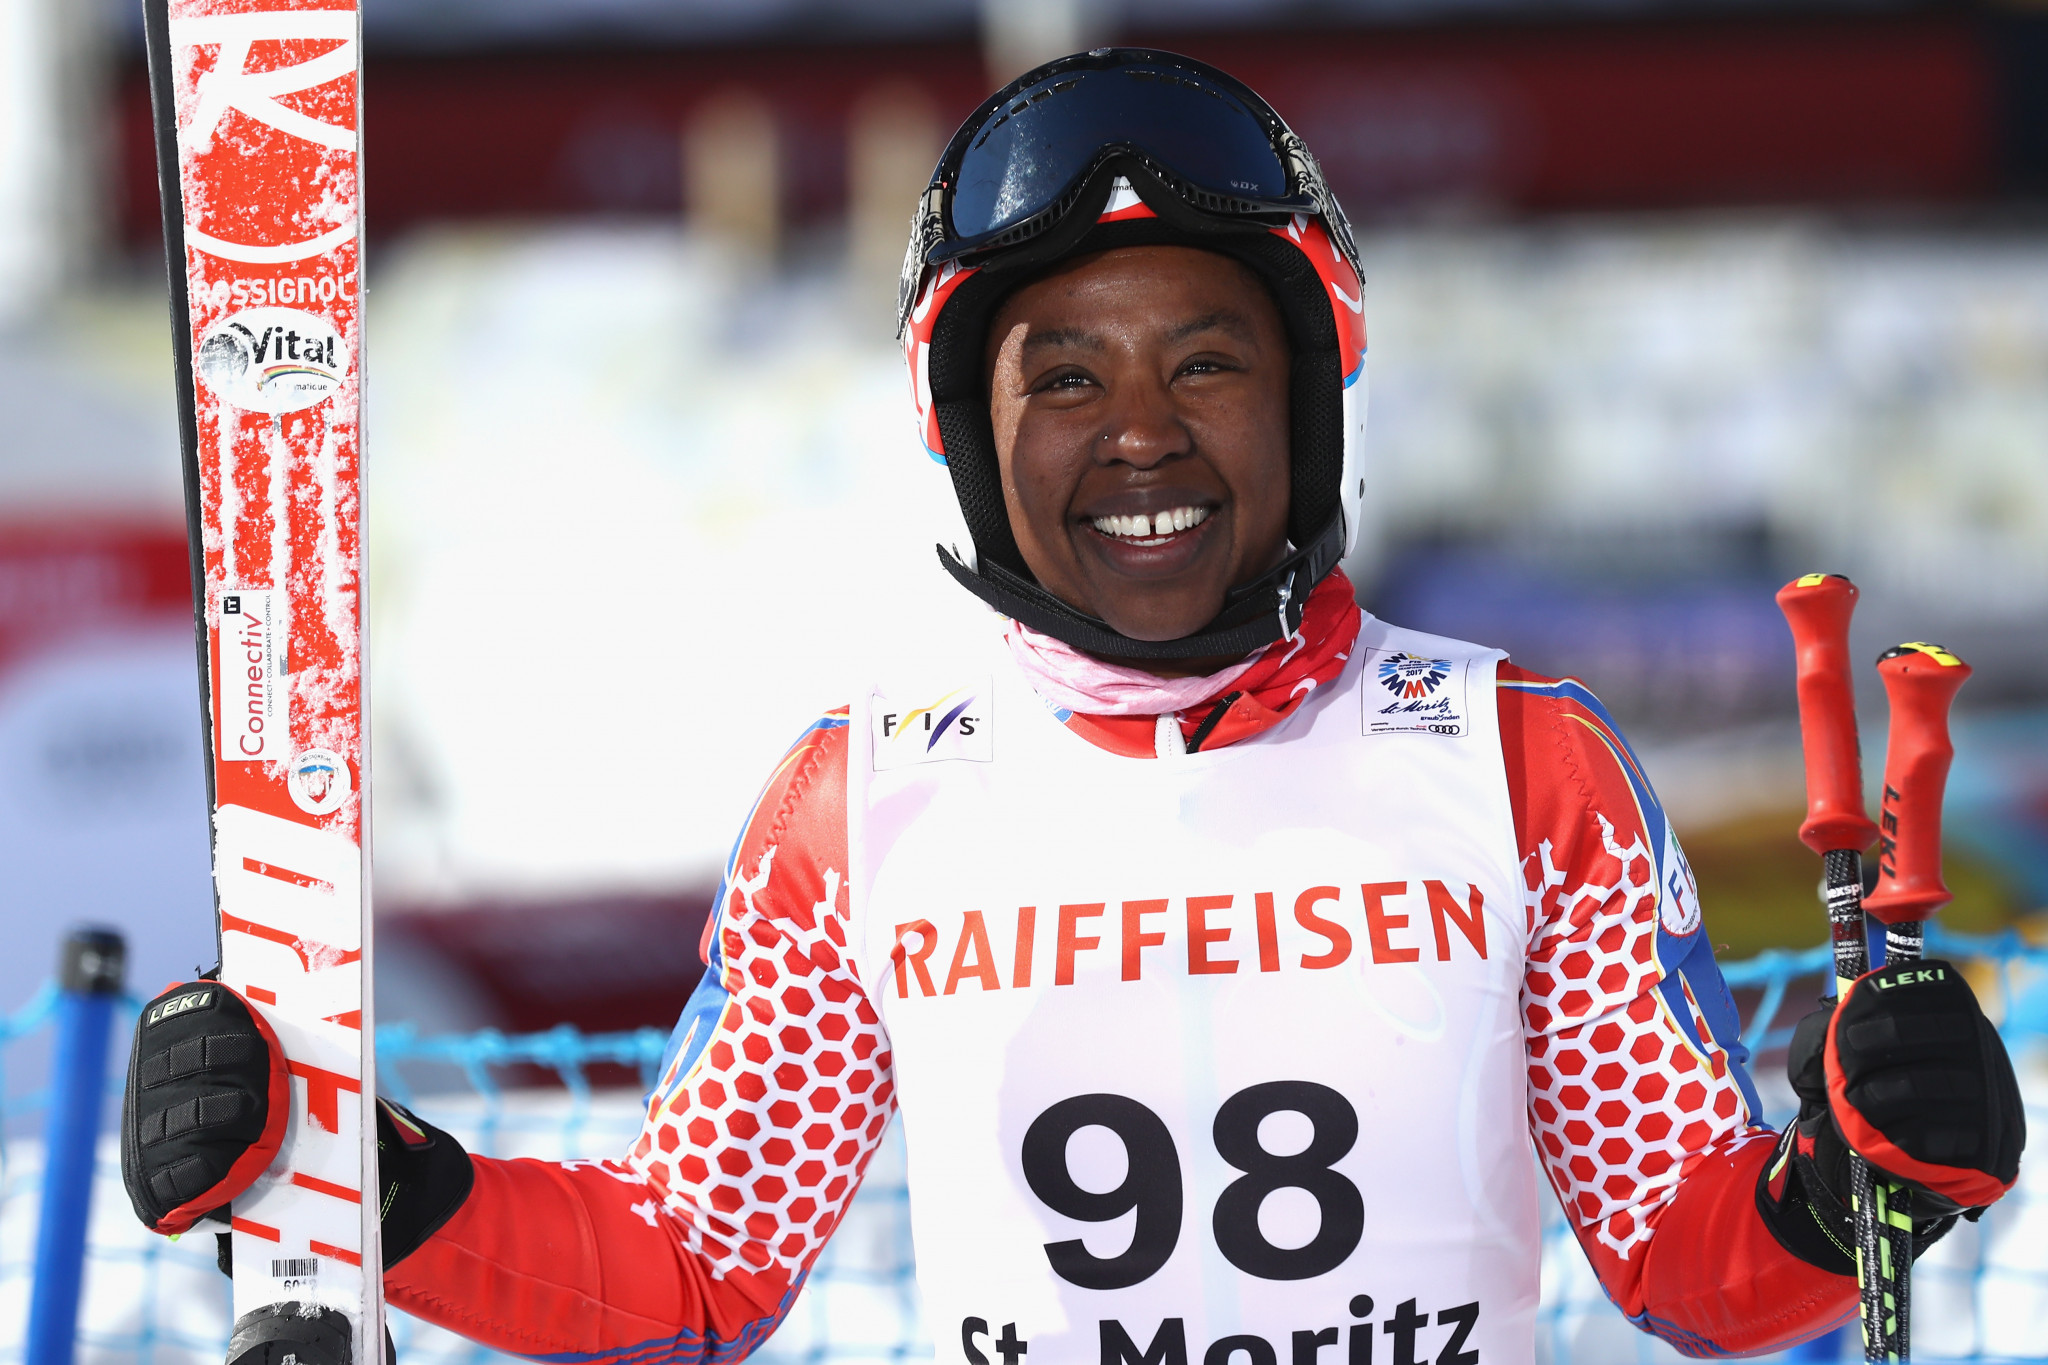 Marti aiming to be first skier from Haiti to compete at Winter Olympics in 2022